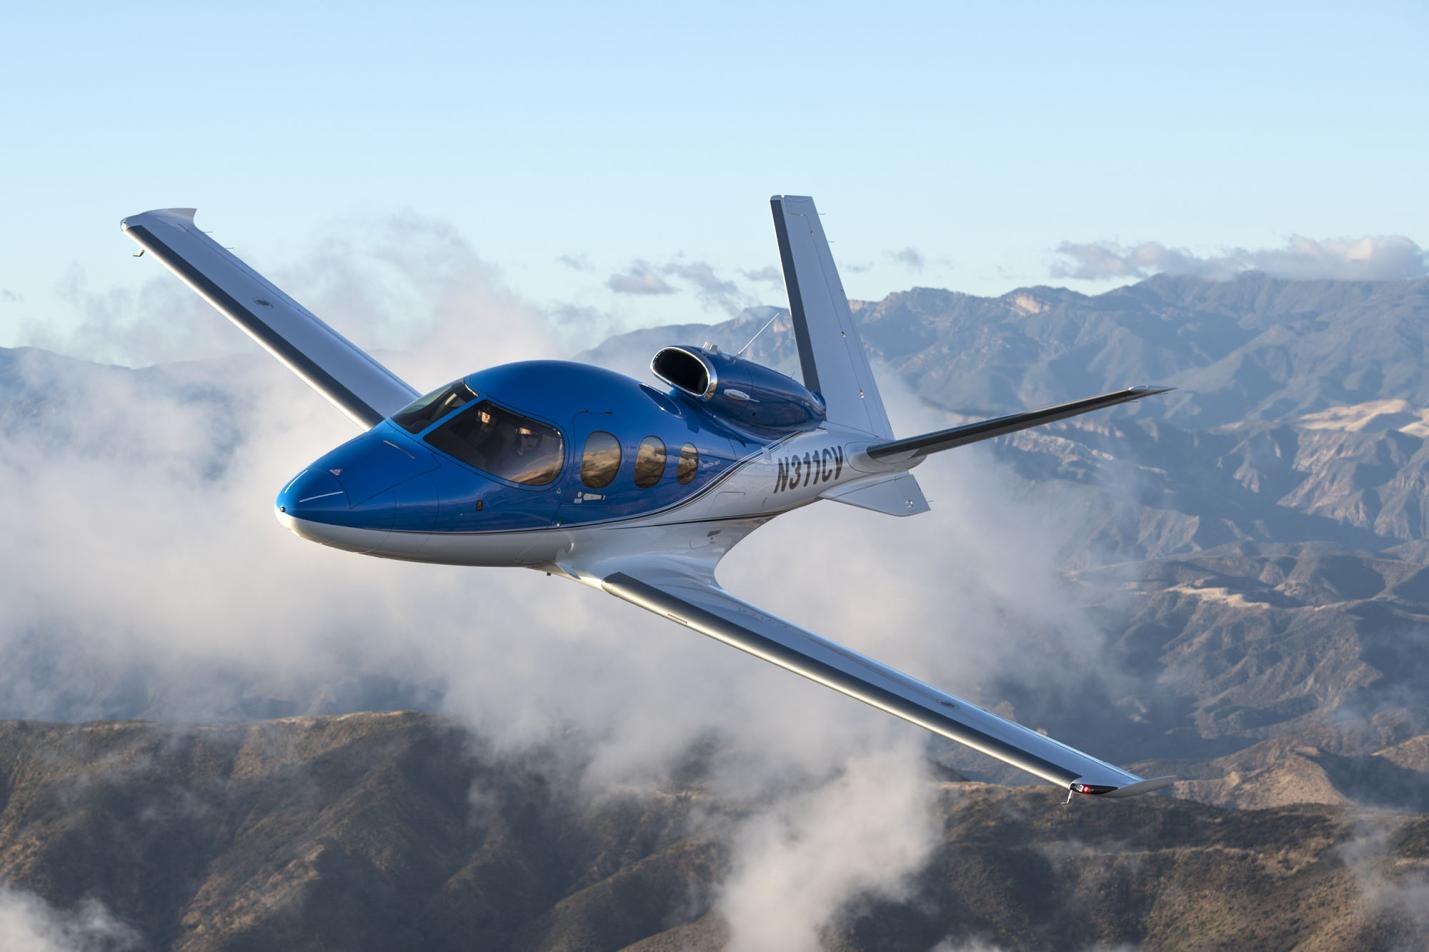 Cirrus Aircraft's Cirrus IQ: The Future of Flight Training - How Does It Revolutionize the Learning Experience?